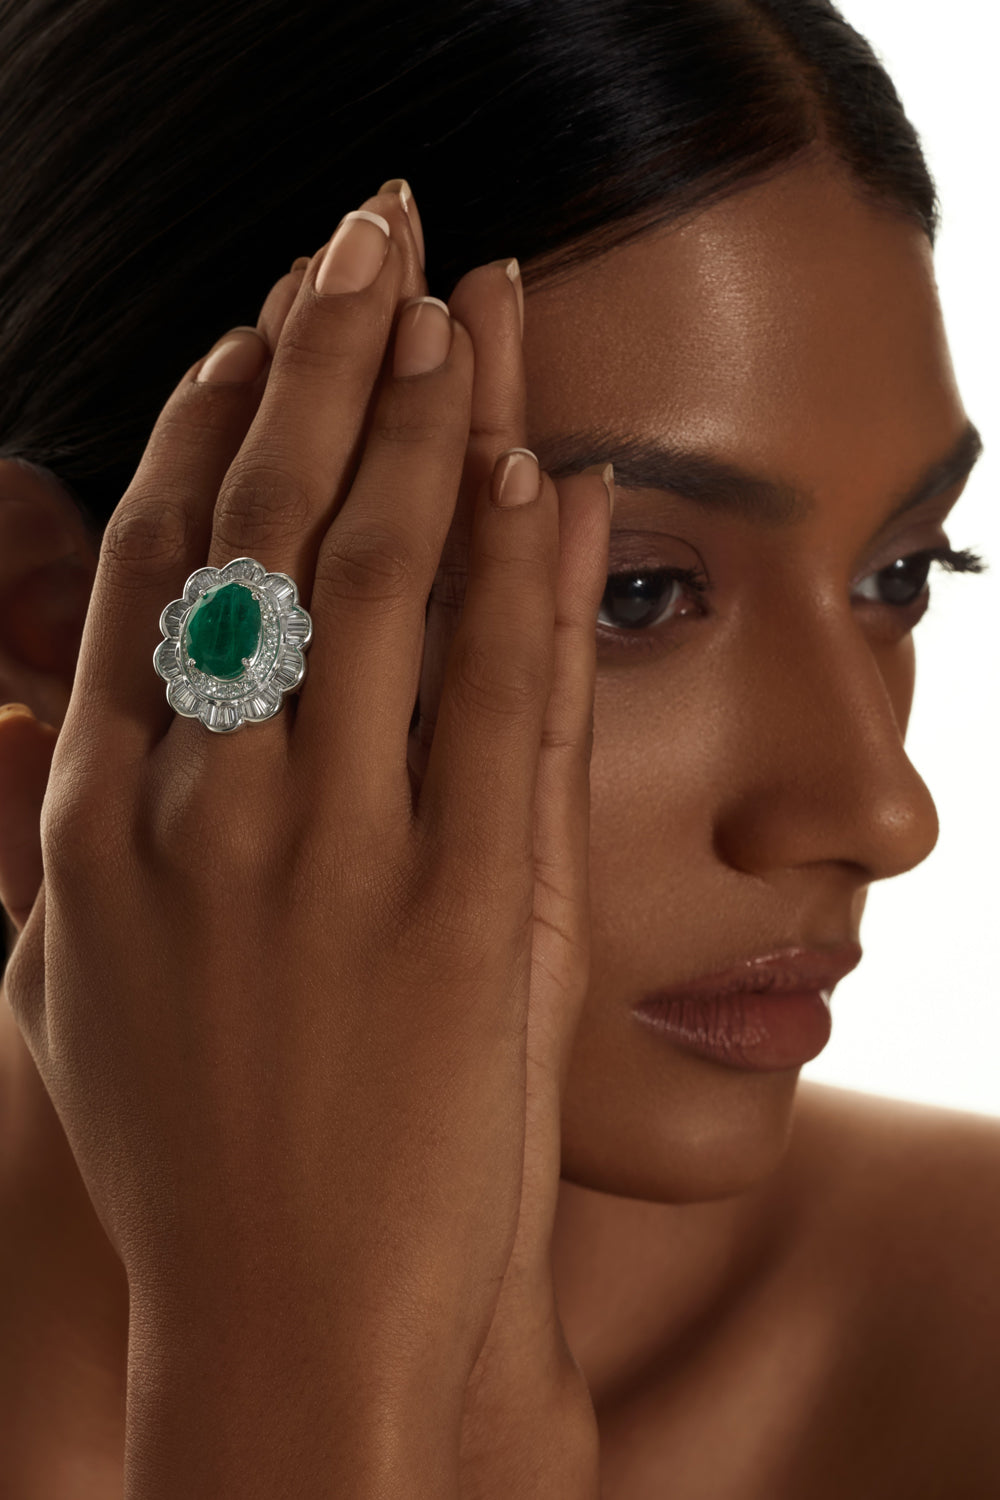 Classic Emerald and Diamond Cocktail Ring in 18KT White Gold